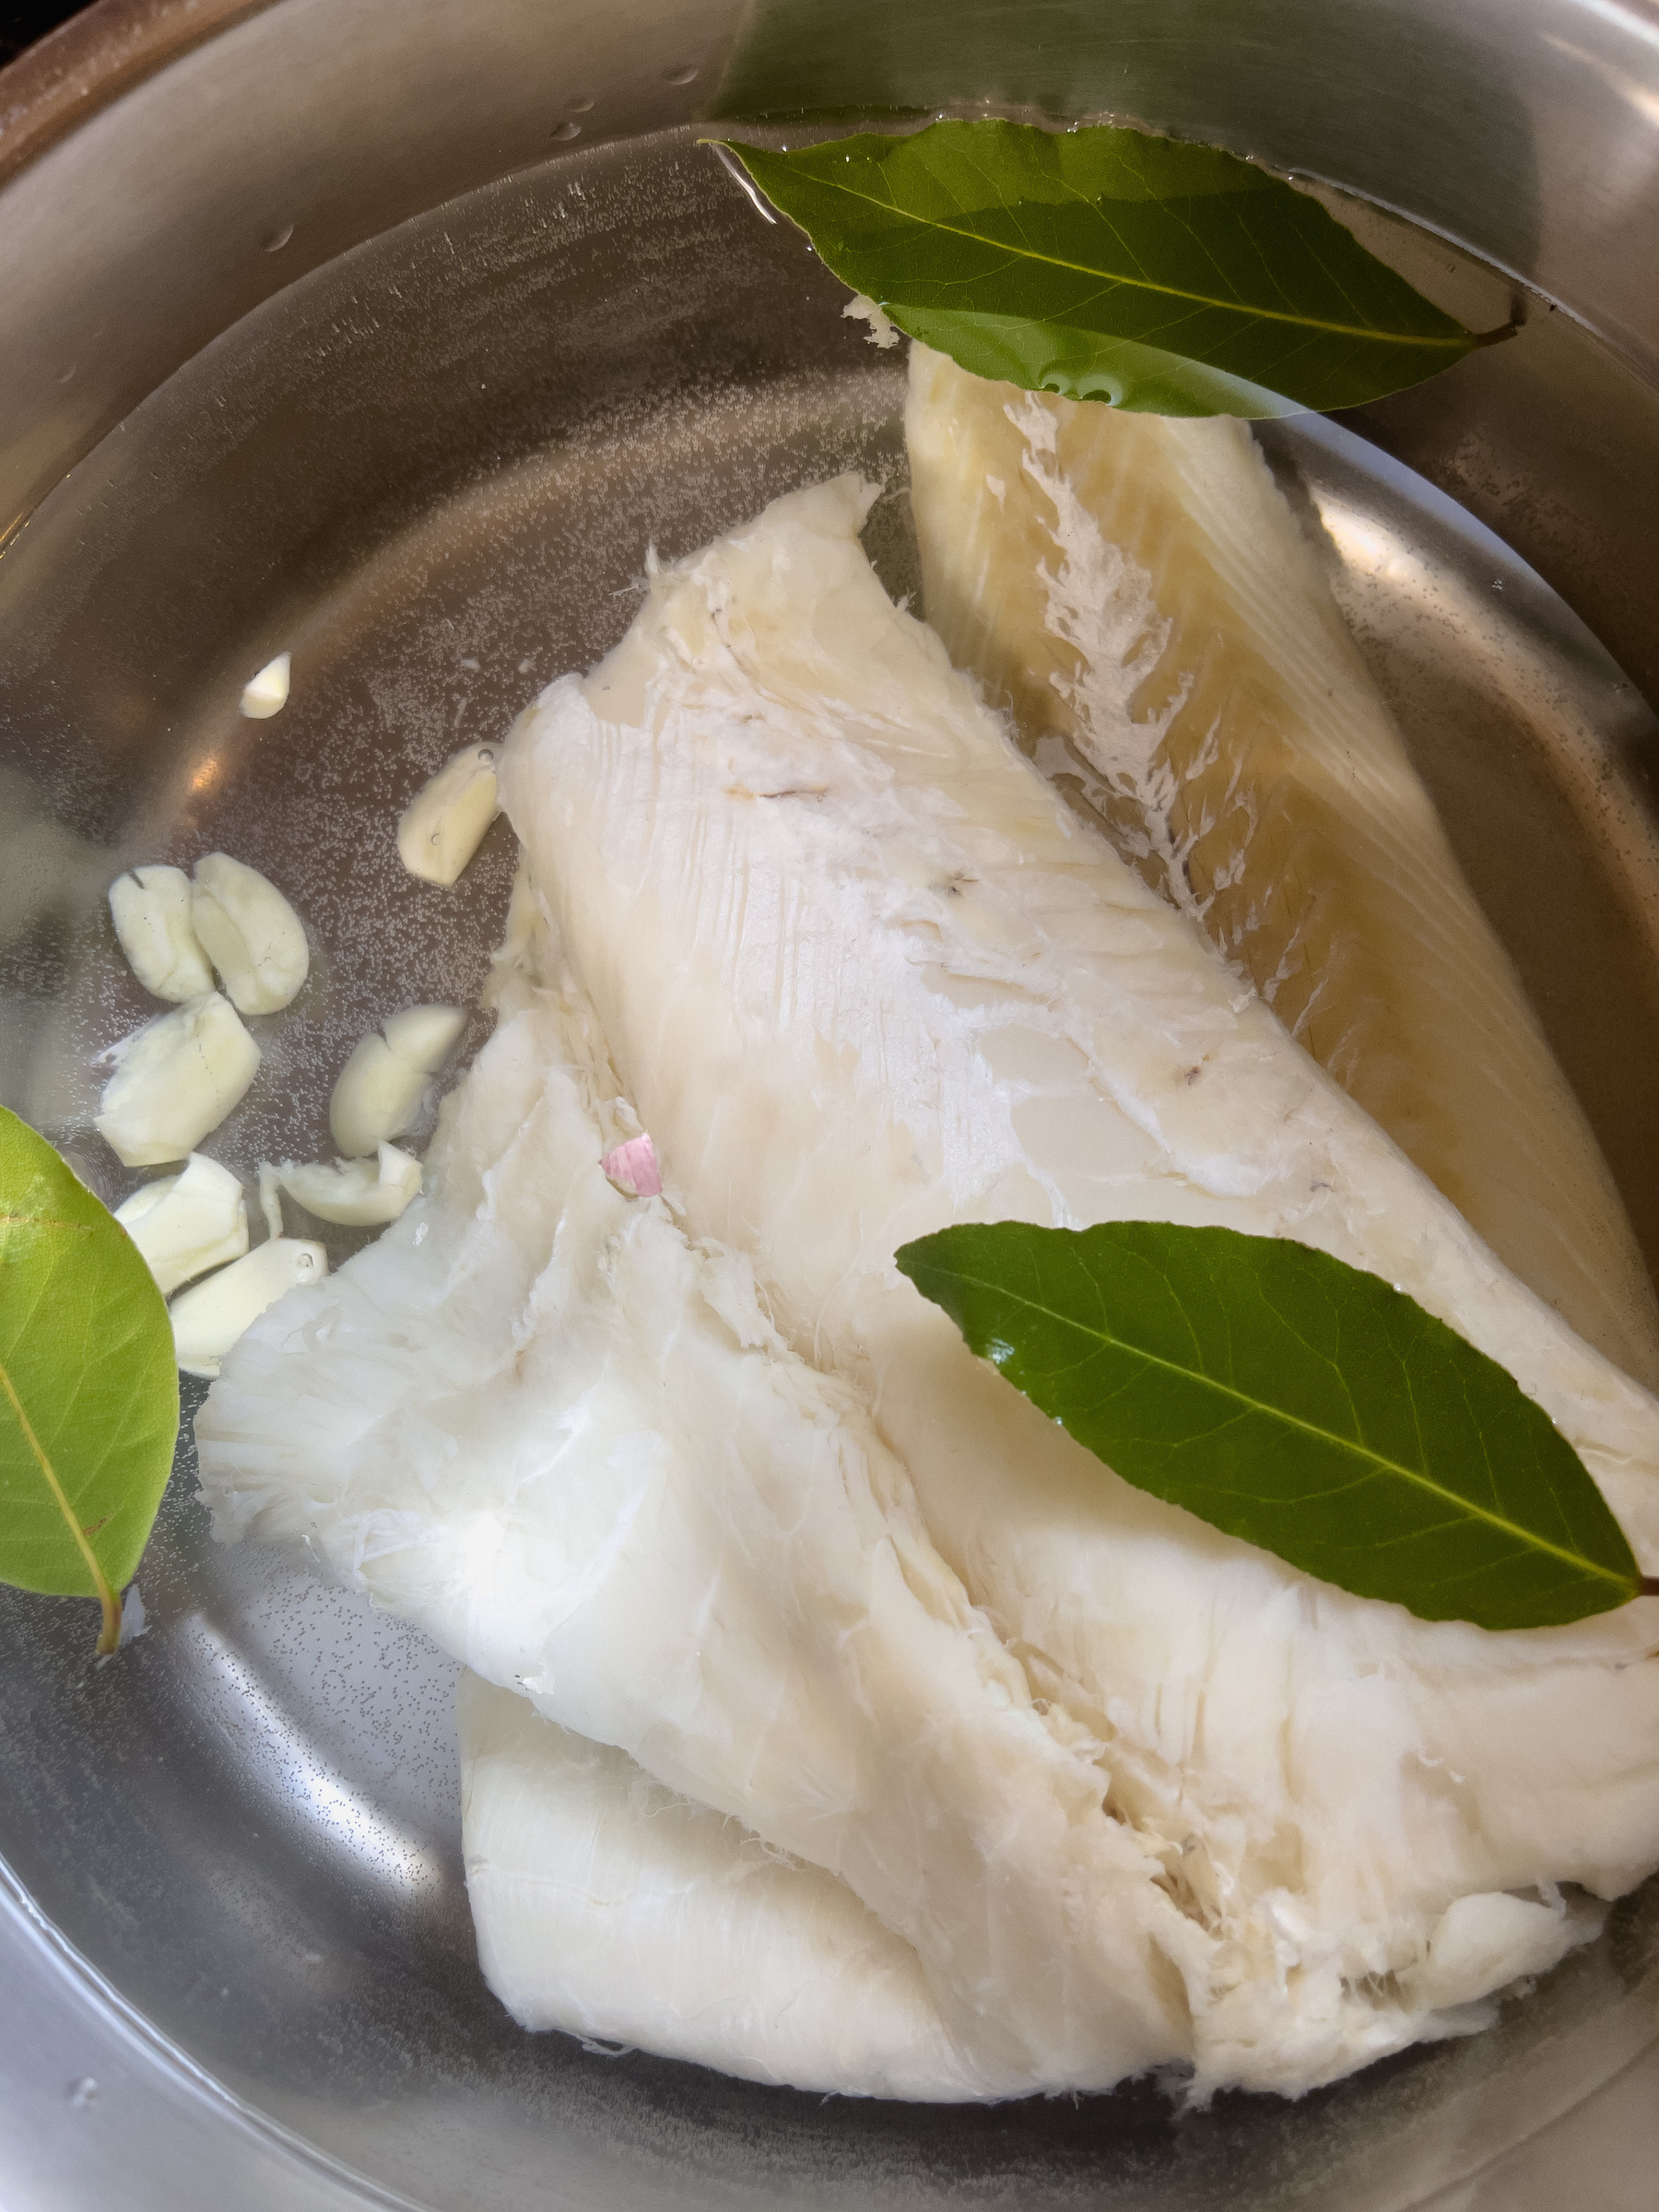 Salt cod, bay leaves and garlic in a pot with water, ready to start cooking.